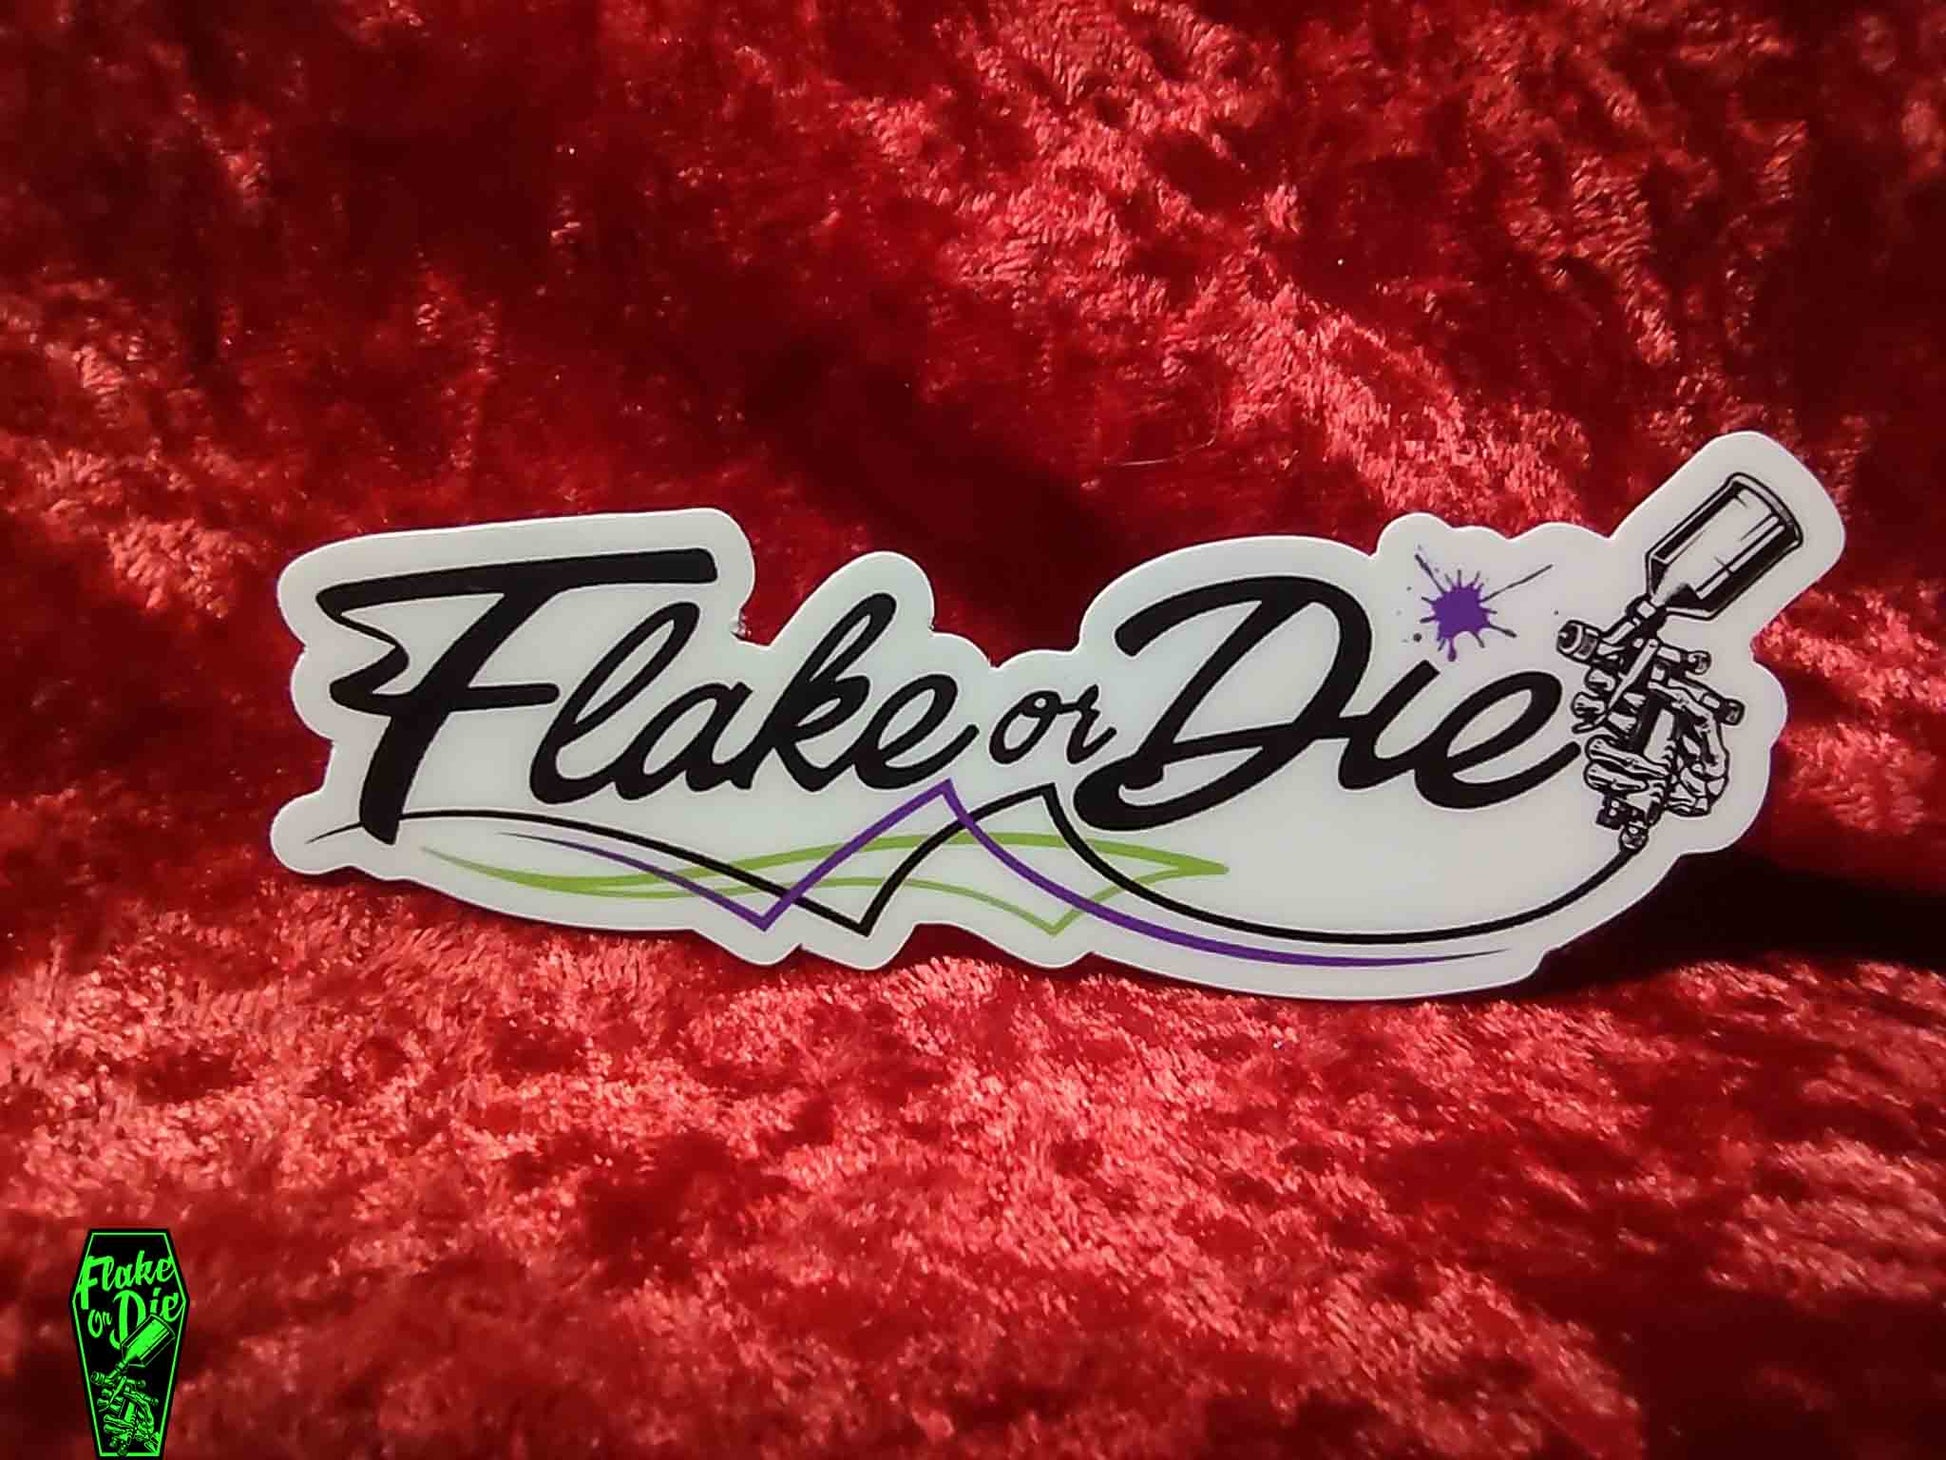 Vinyl sticker, Flake or Die with pinstripe accent and paint splat. on red velvet background